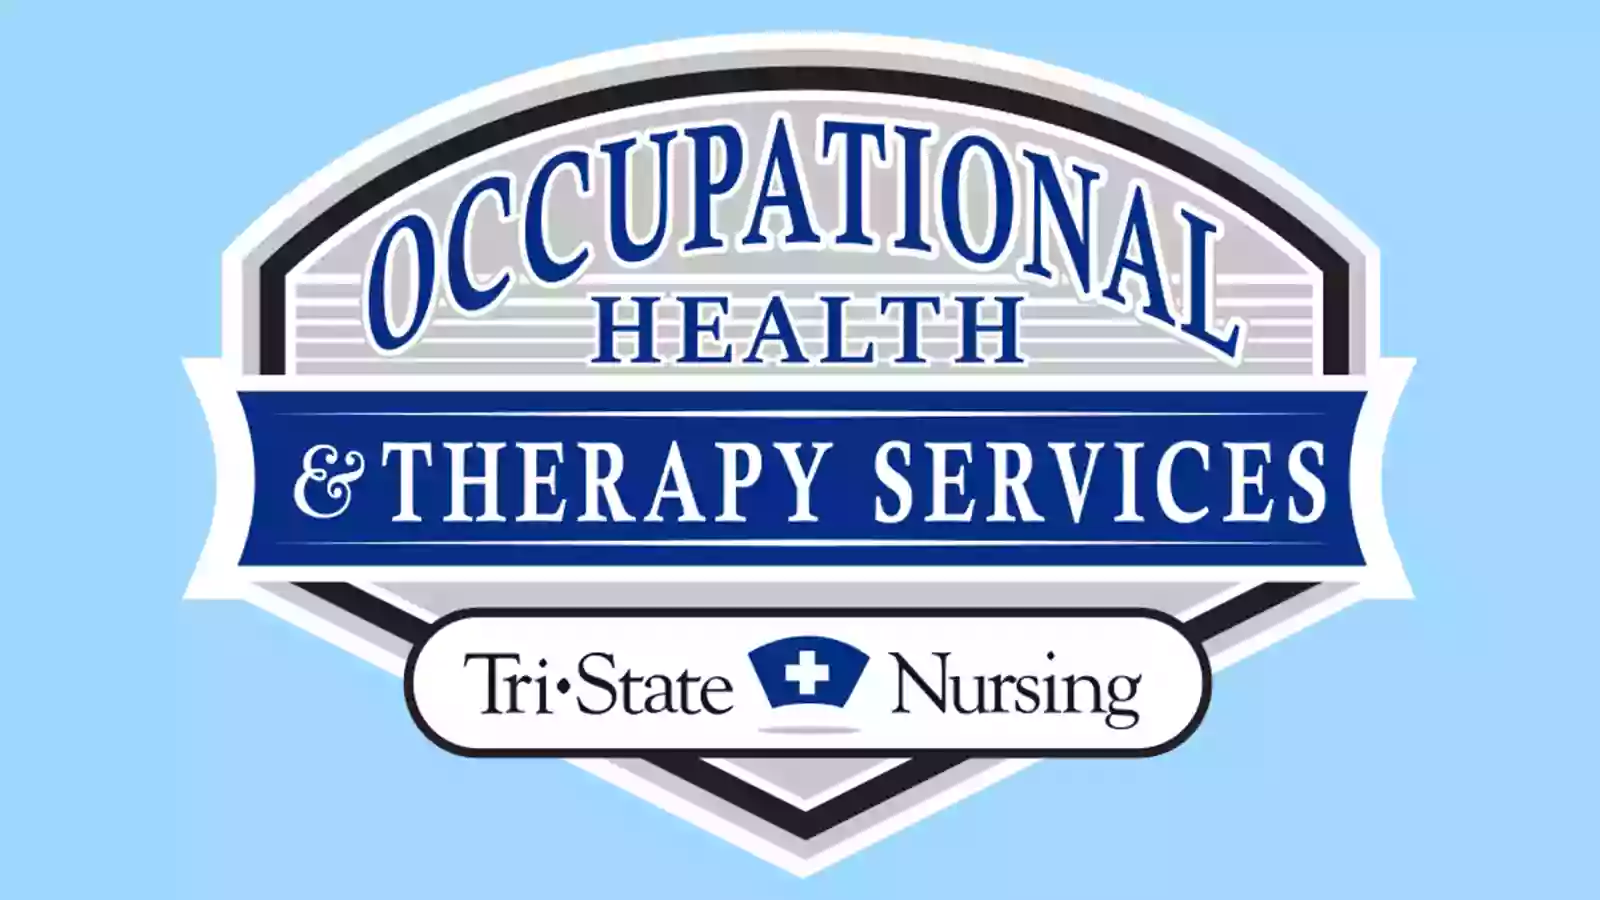 Occupational Health and Therapy Services